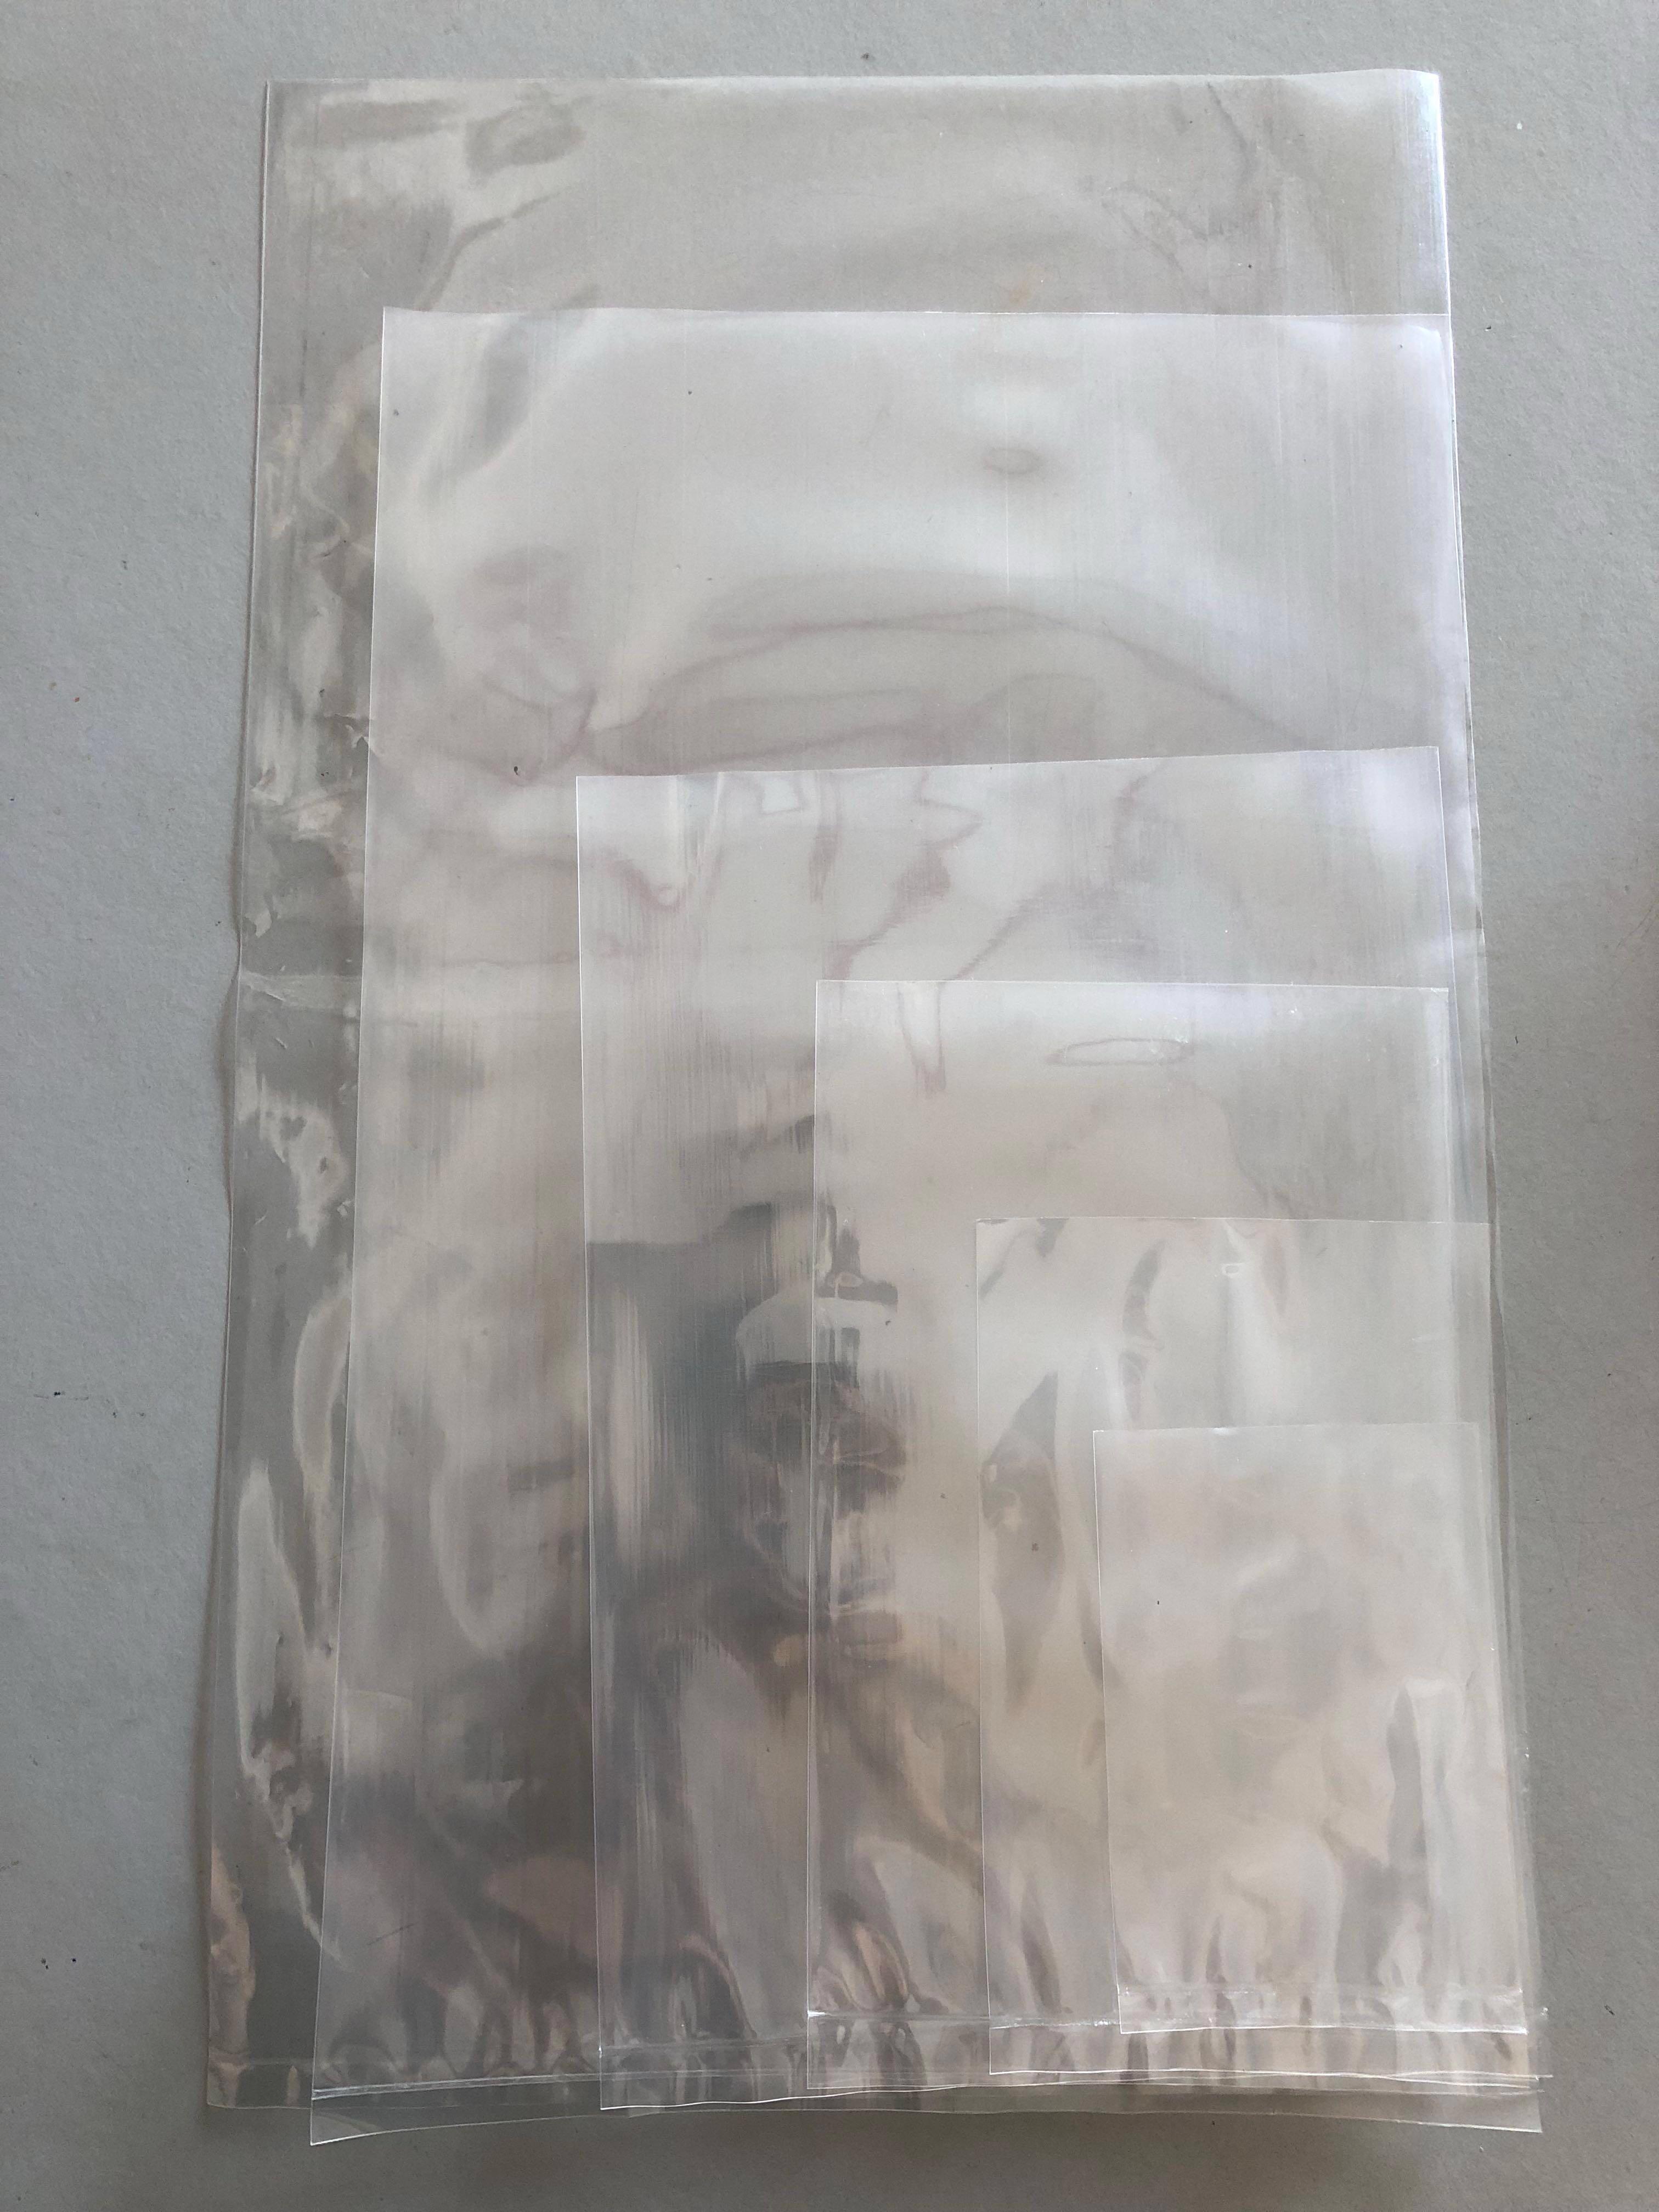 China Hs Code For Plastic Bags, Hs Code For Plastic Bags Manufacturers,  Suppliers, Price | Made-in-China.com